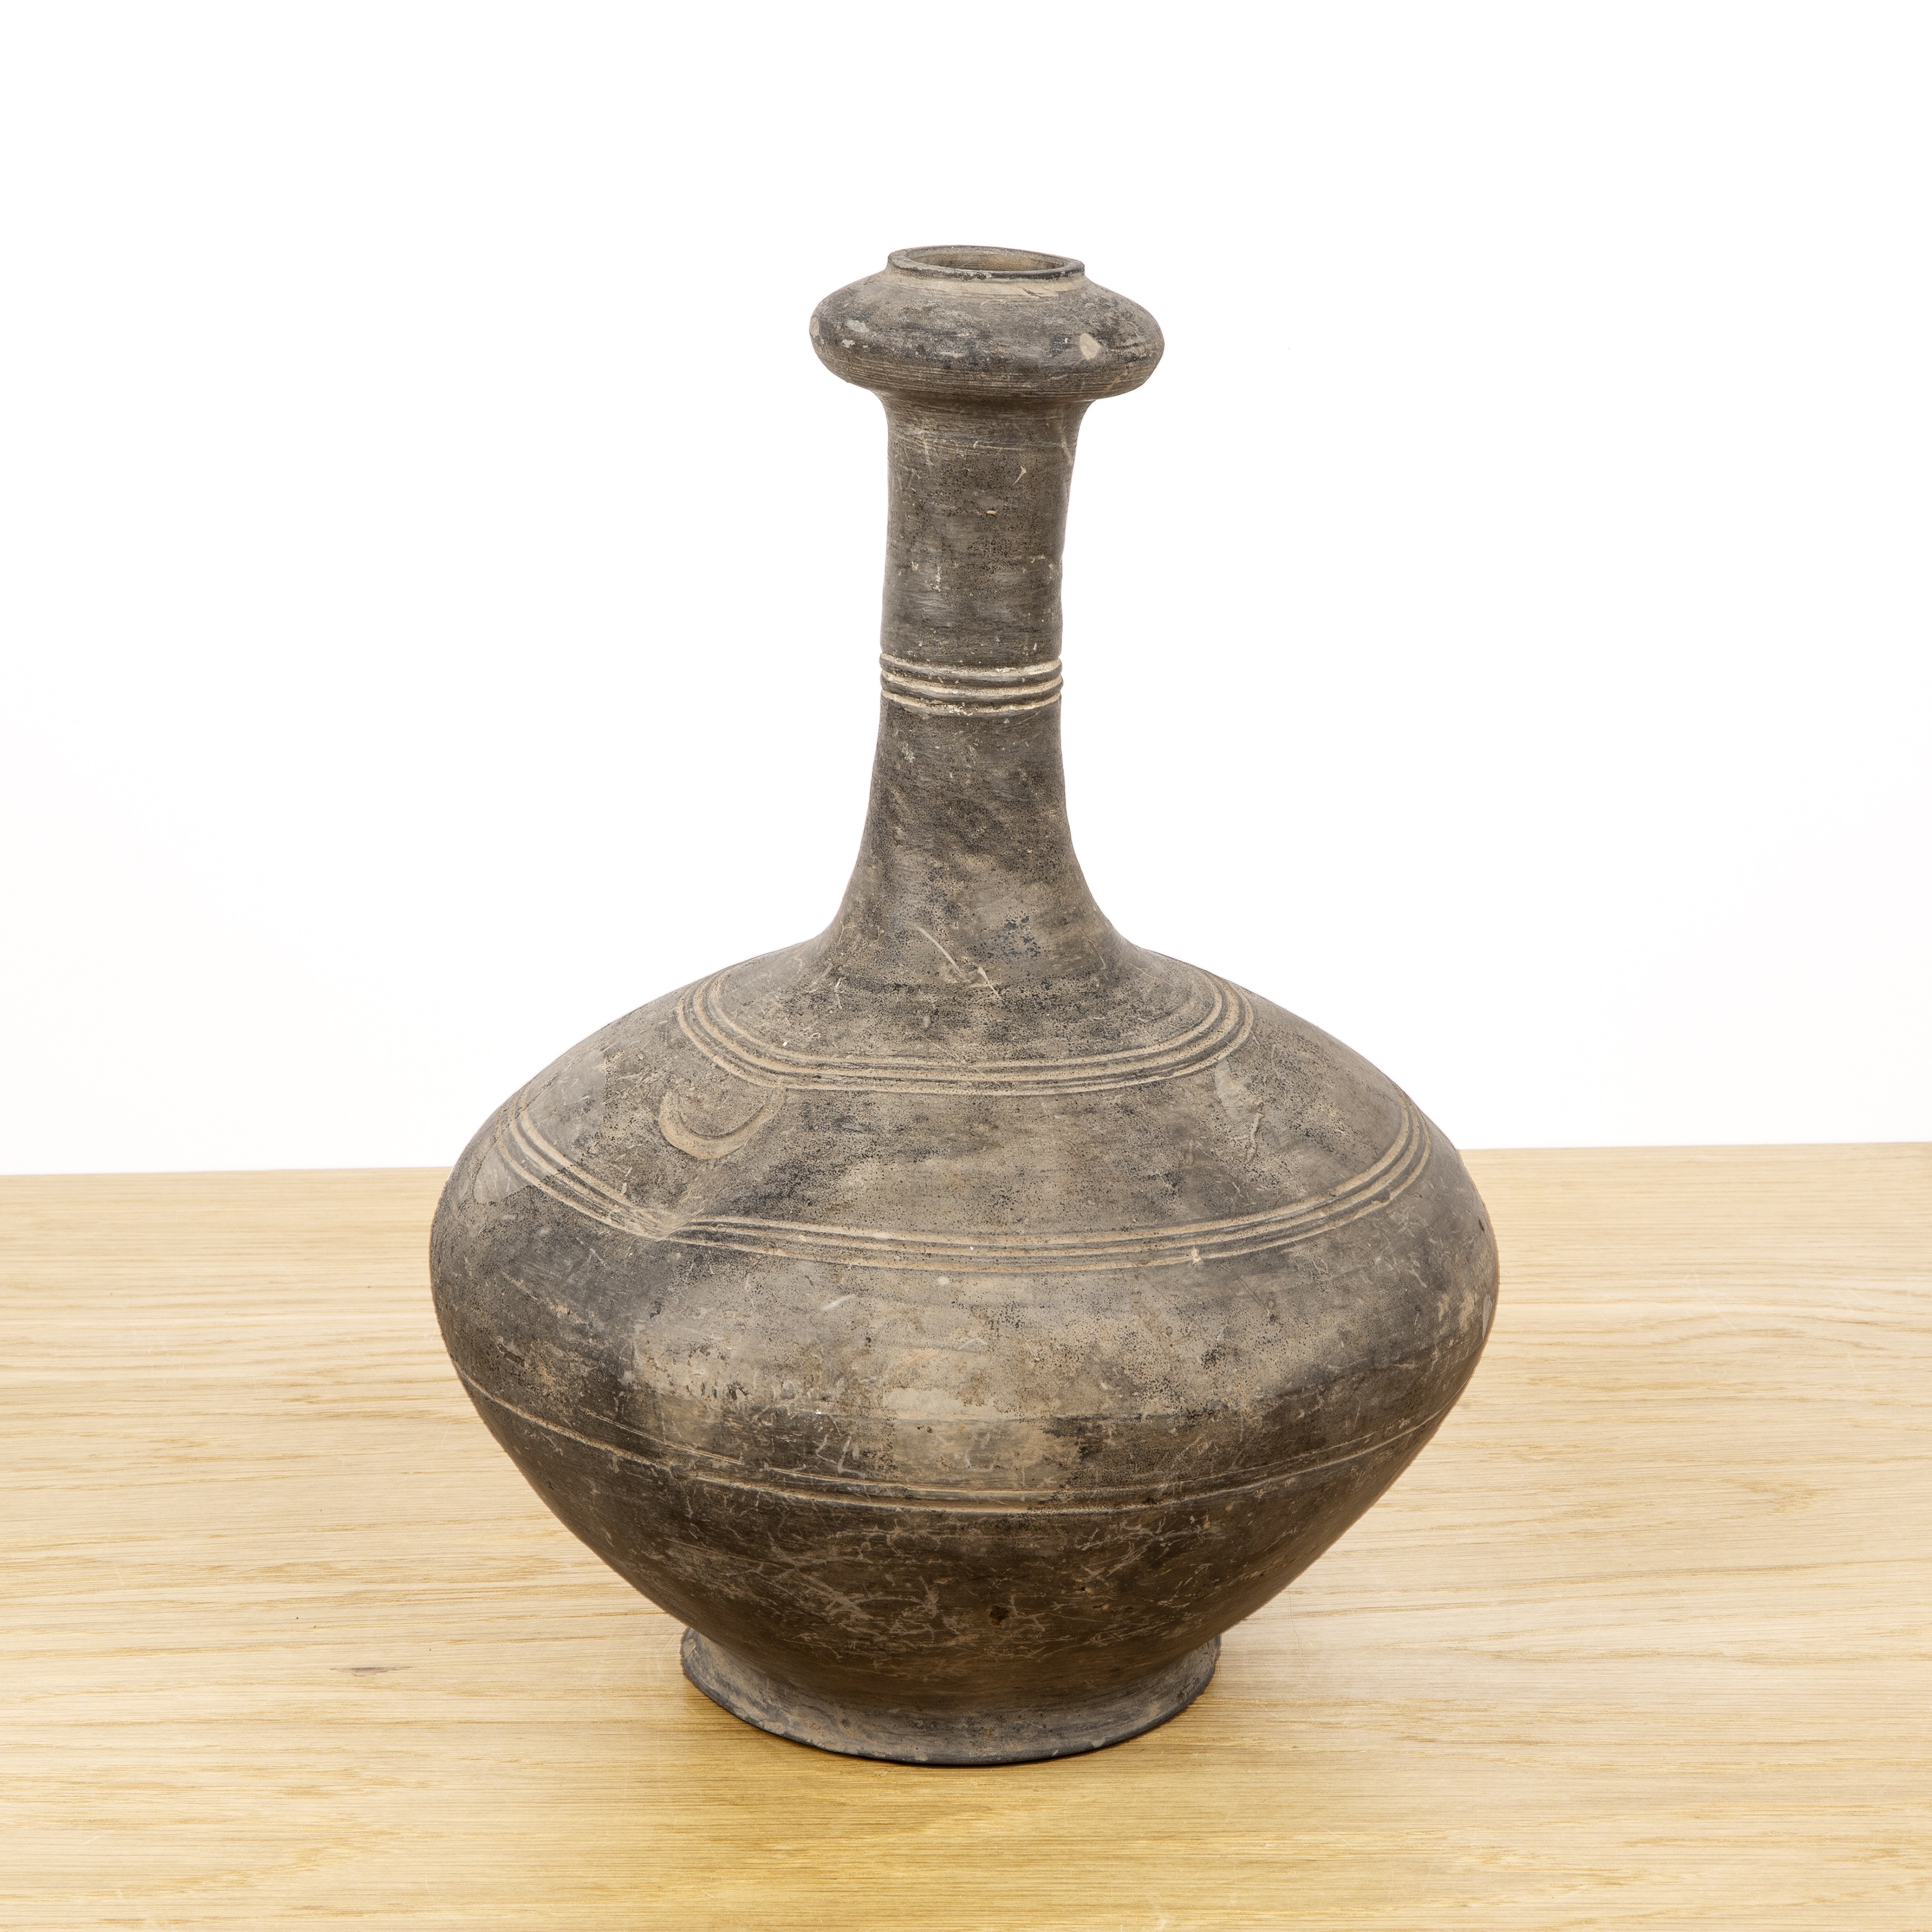 Garlic mouth funerary jar Chinese, Western Han with reeded and incised bands, 31cm high